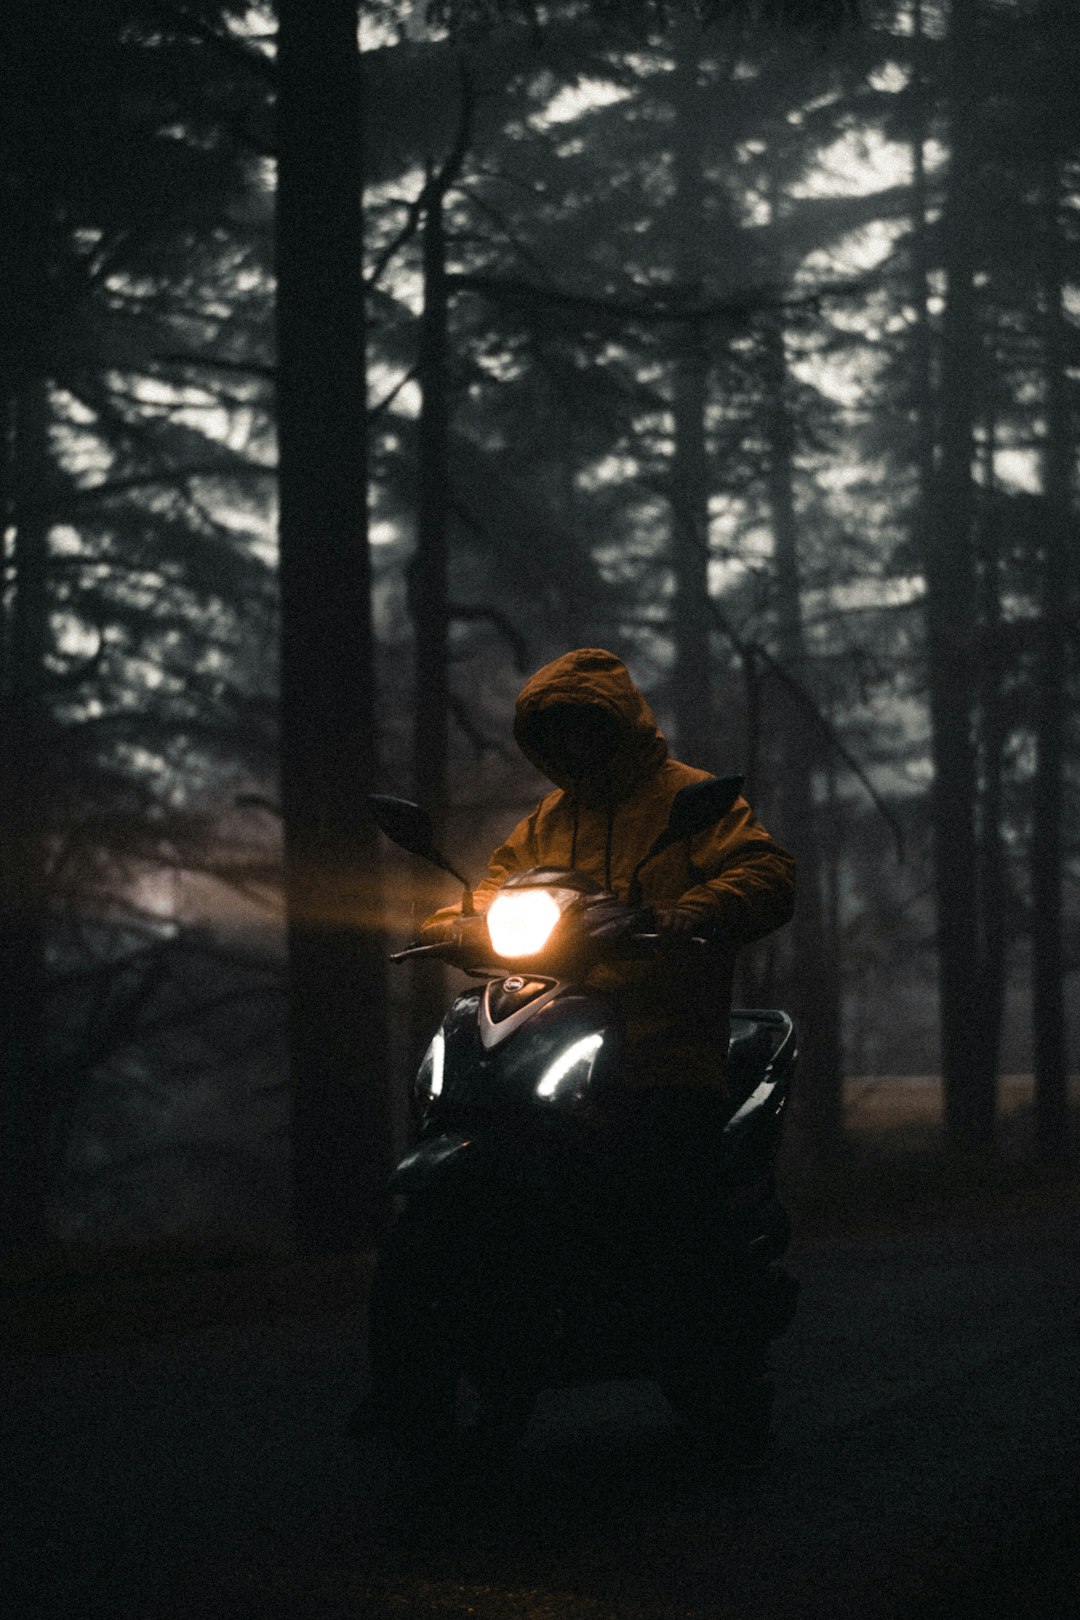 person in black jacket and black pants riding motorcycle in forest during night time